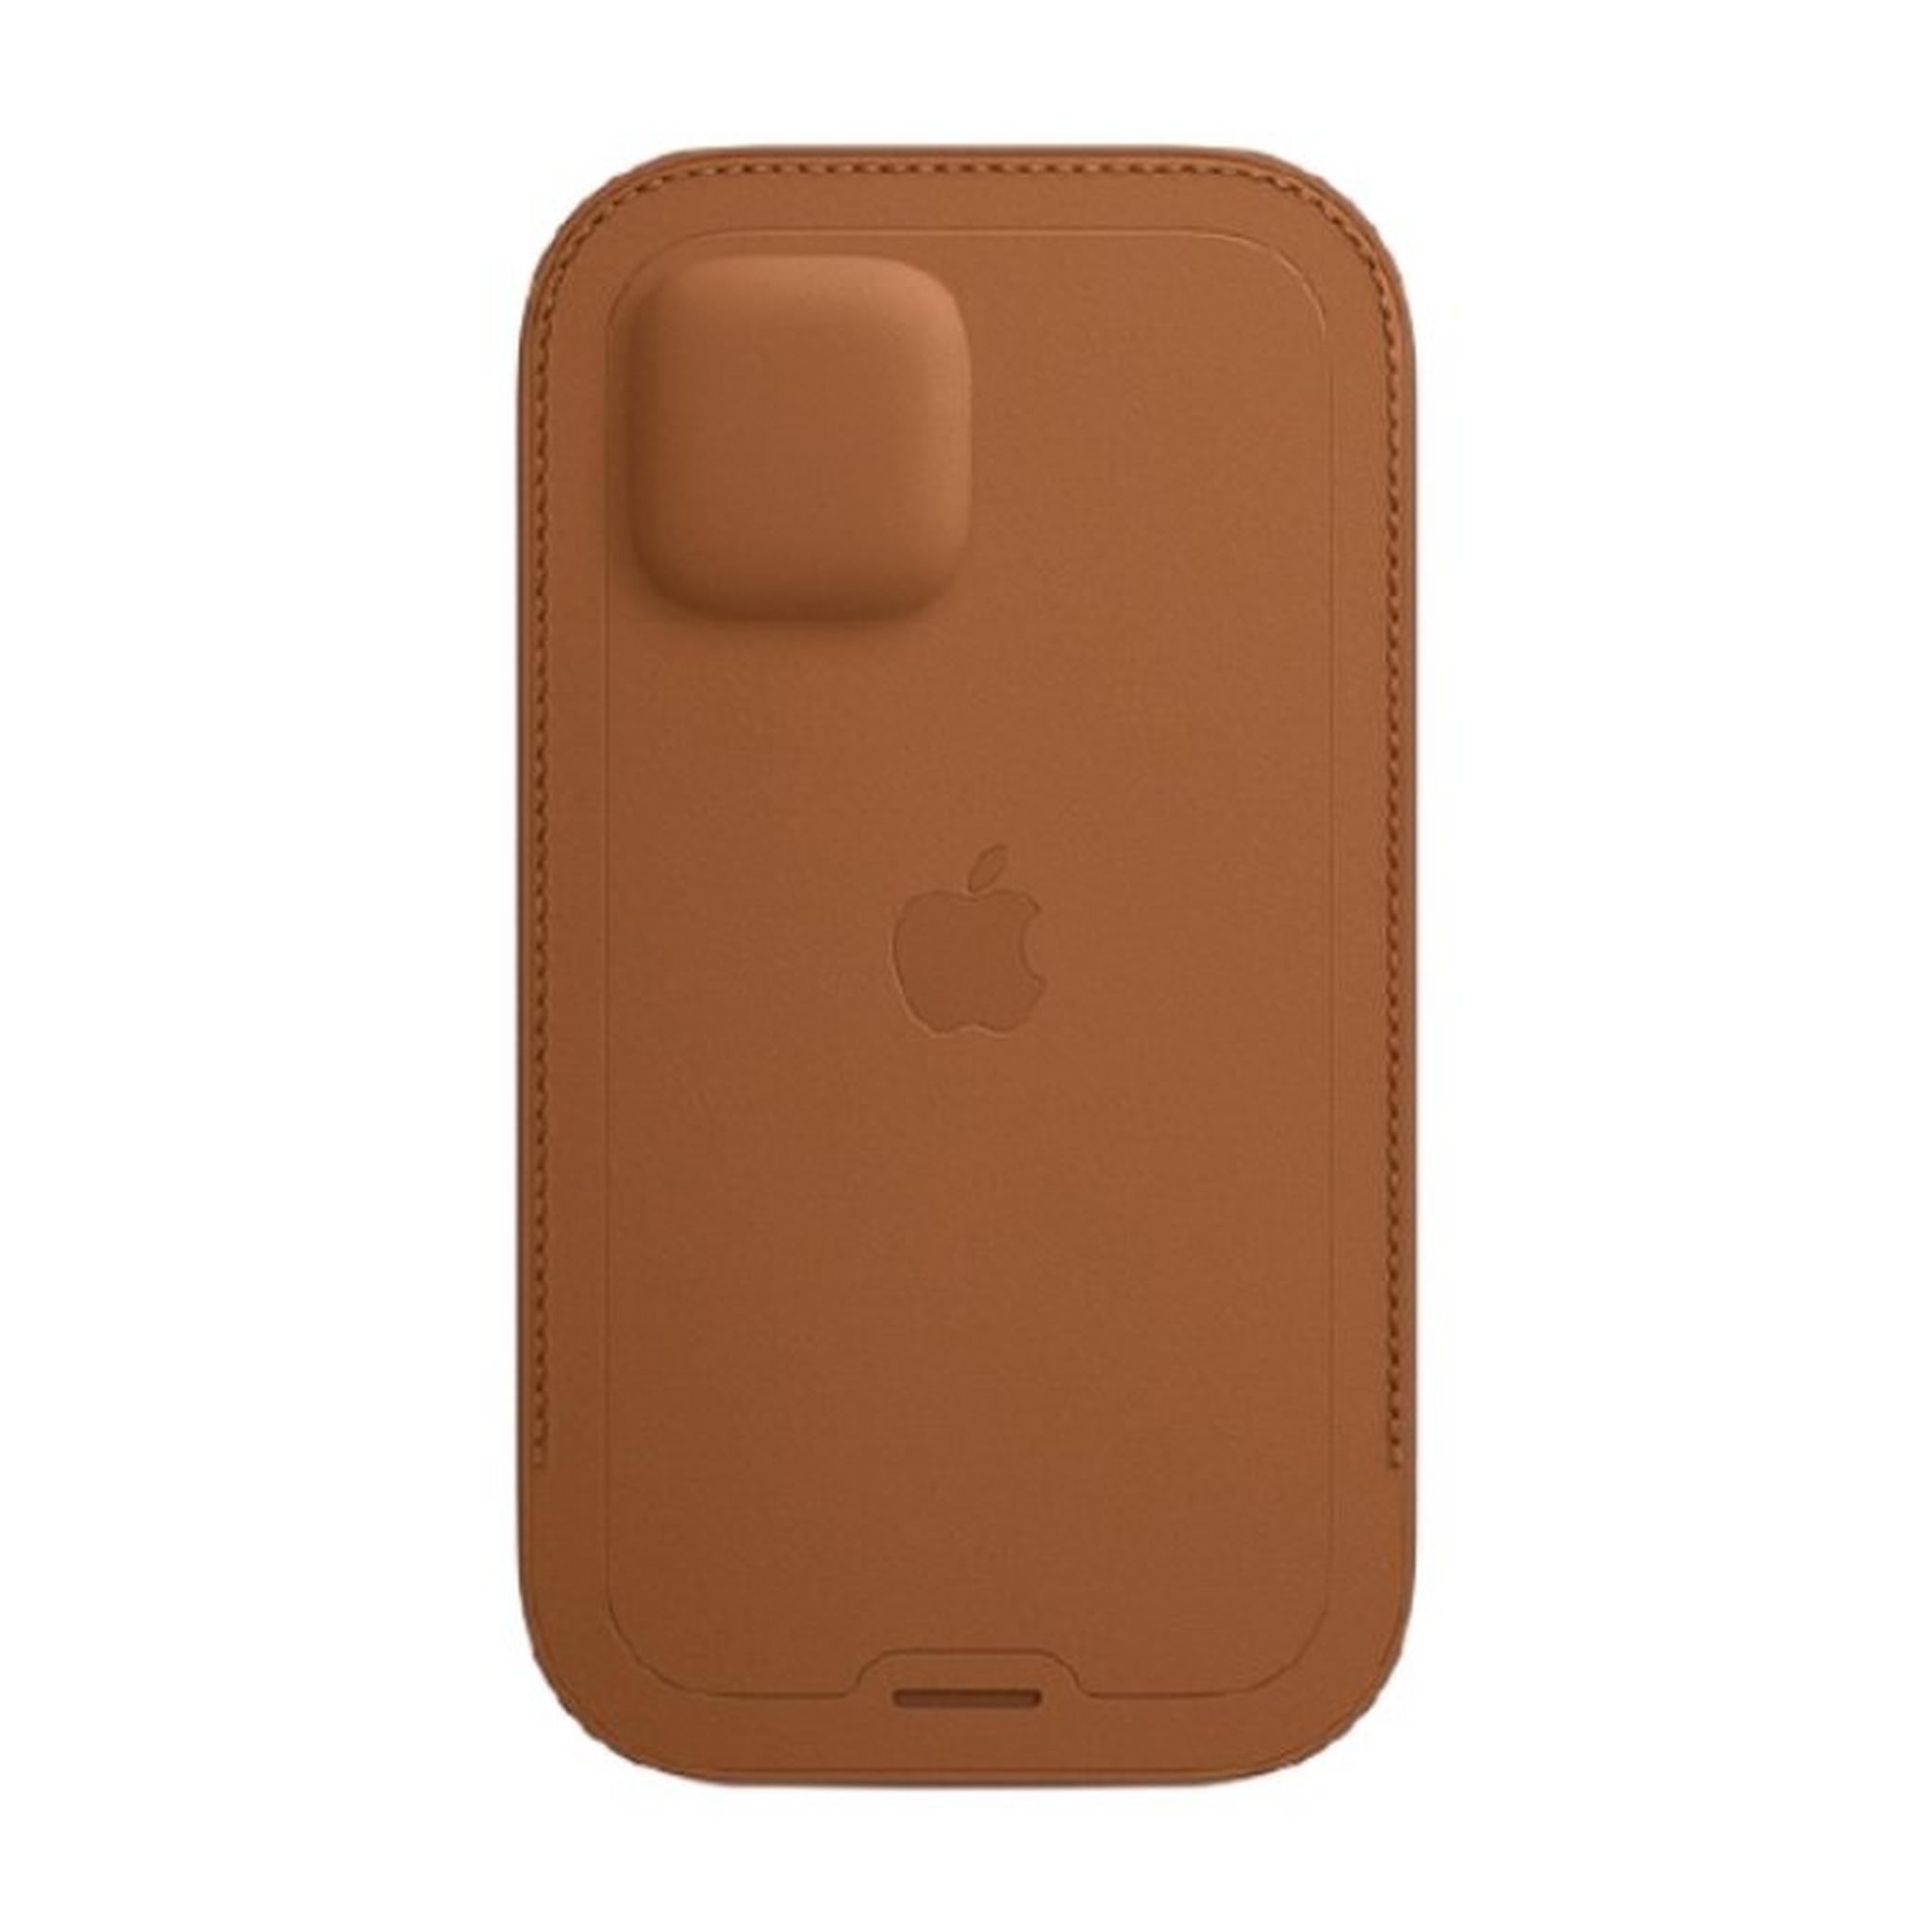 Apple iPhone 12 Pro MagSafe Leather Sleeve - Saddle Brown